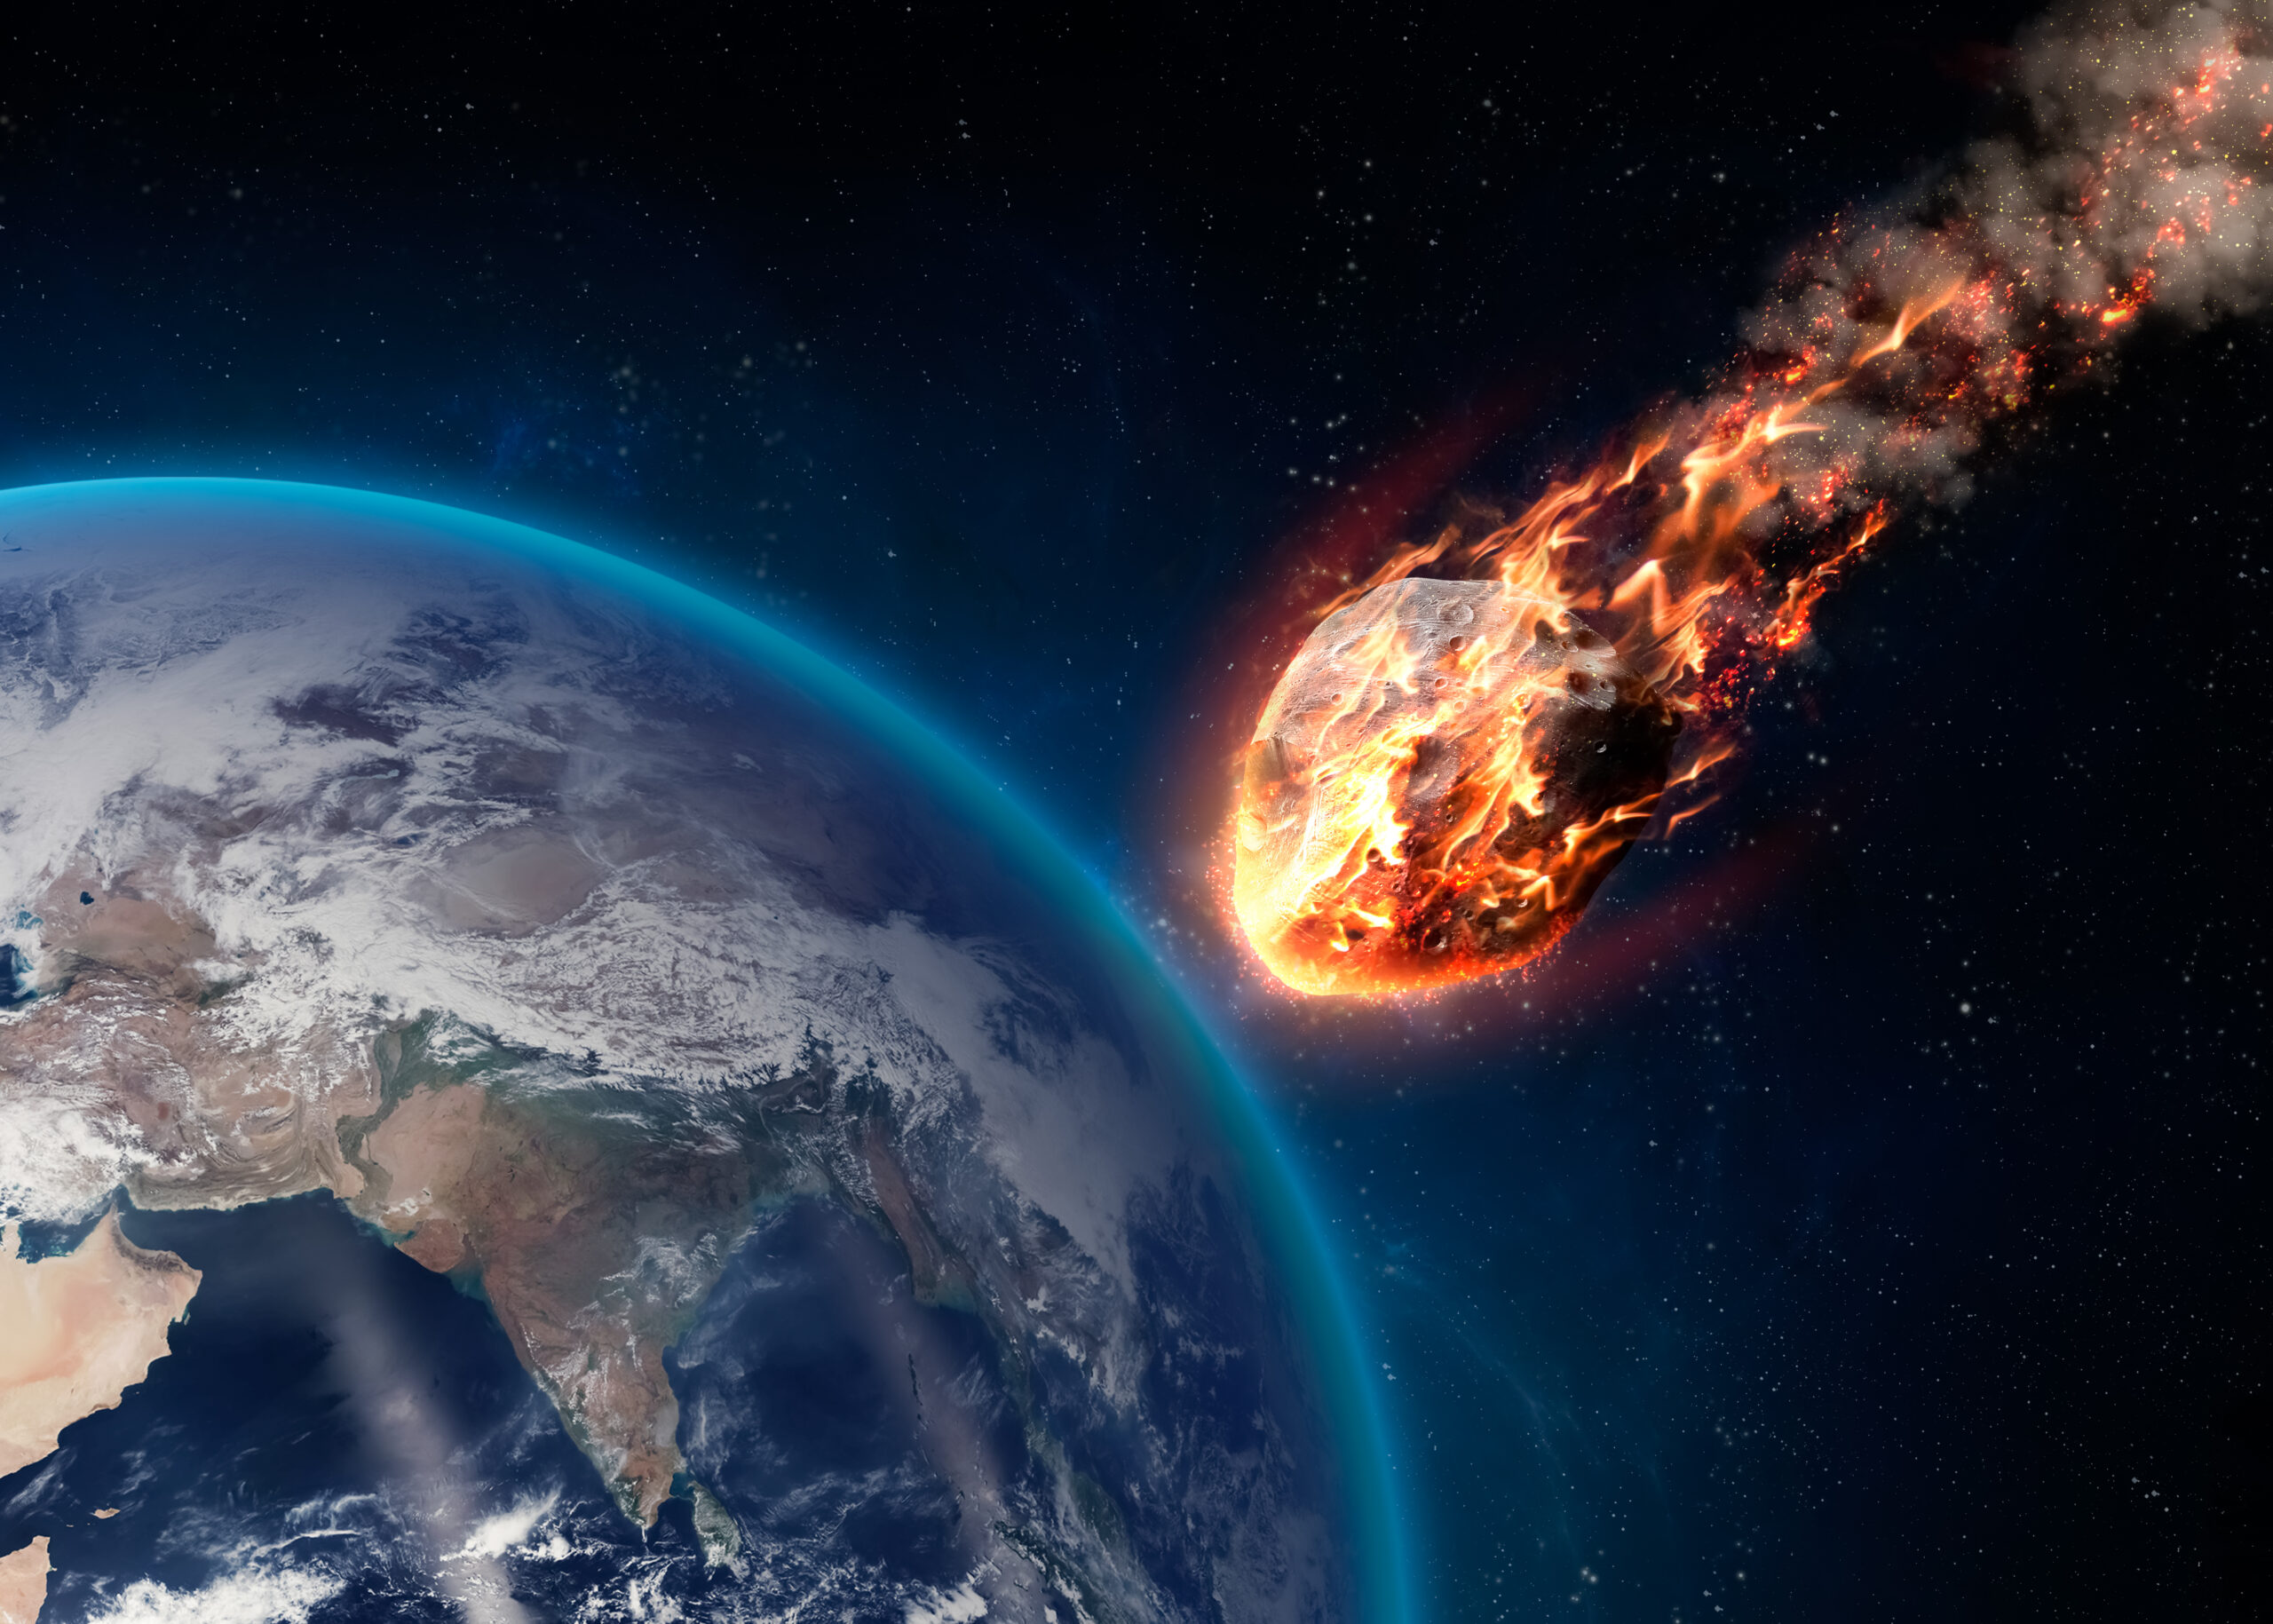 A meteor exploded over the Bering Sea with the energy of 10 atomic bombs